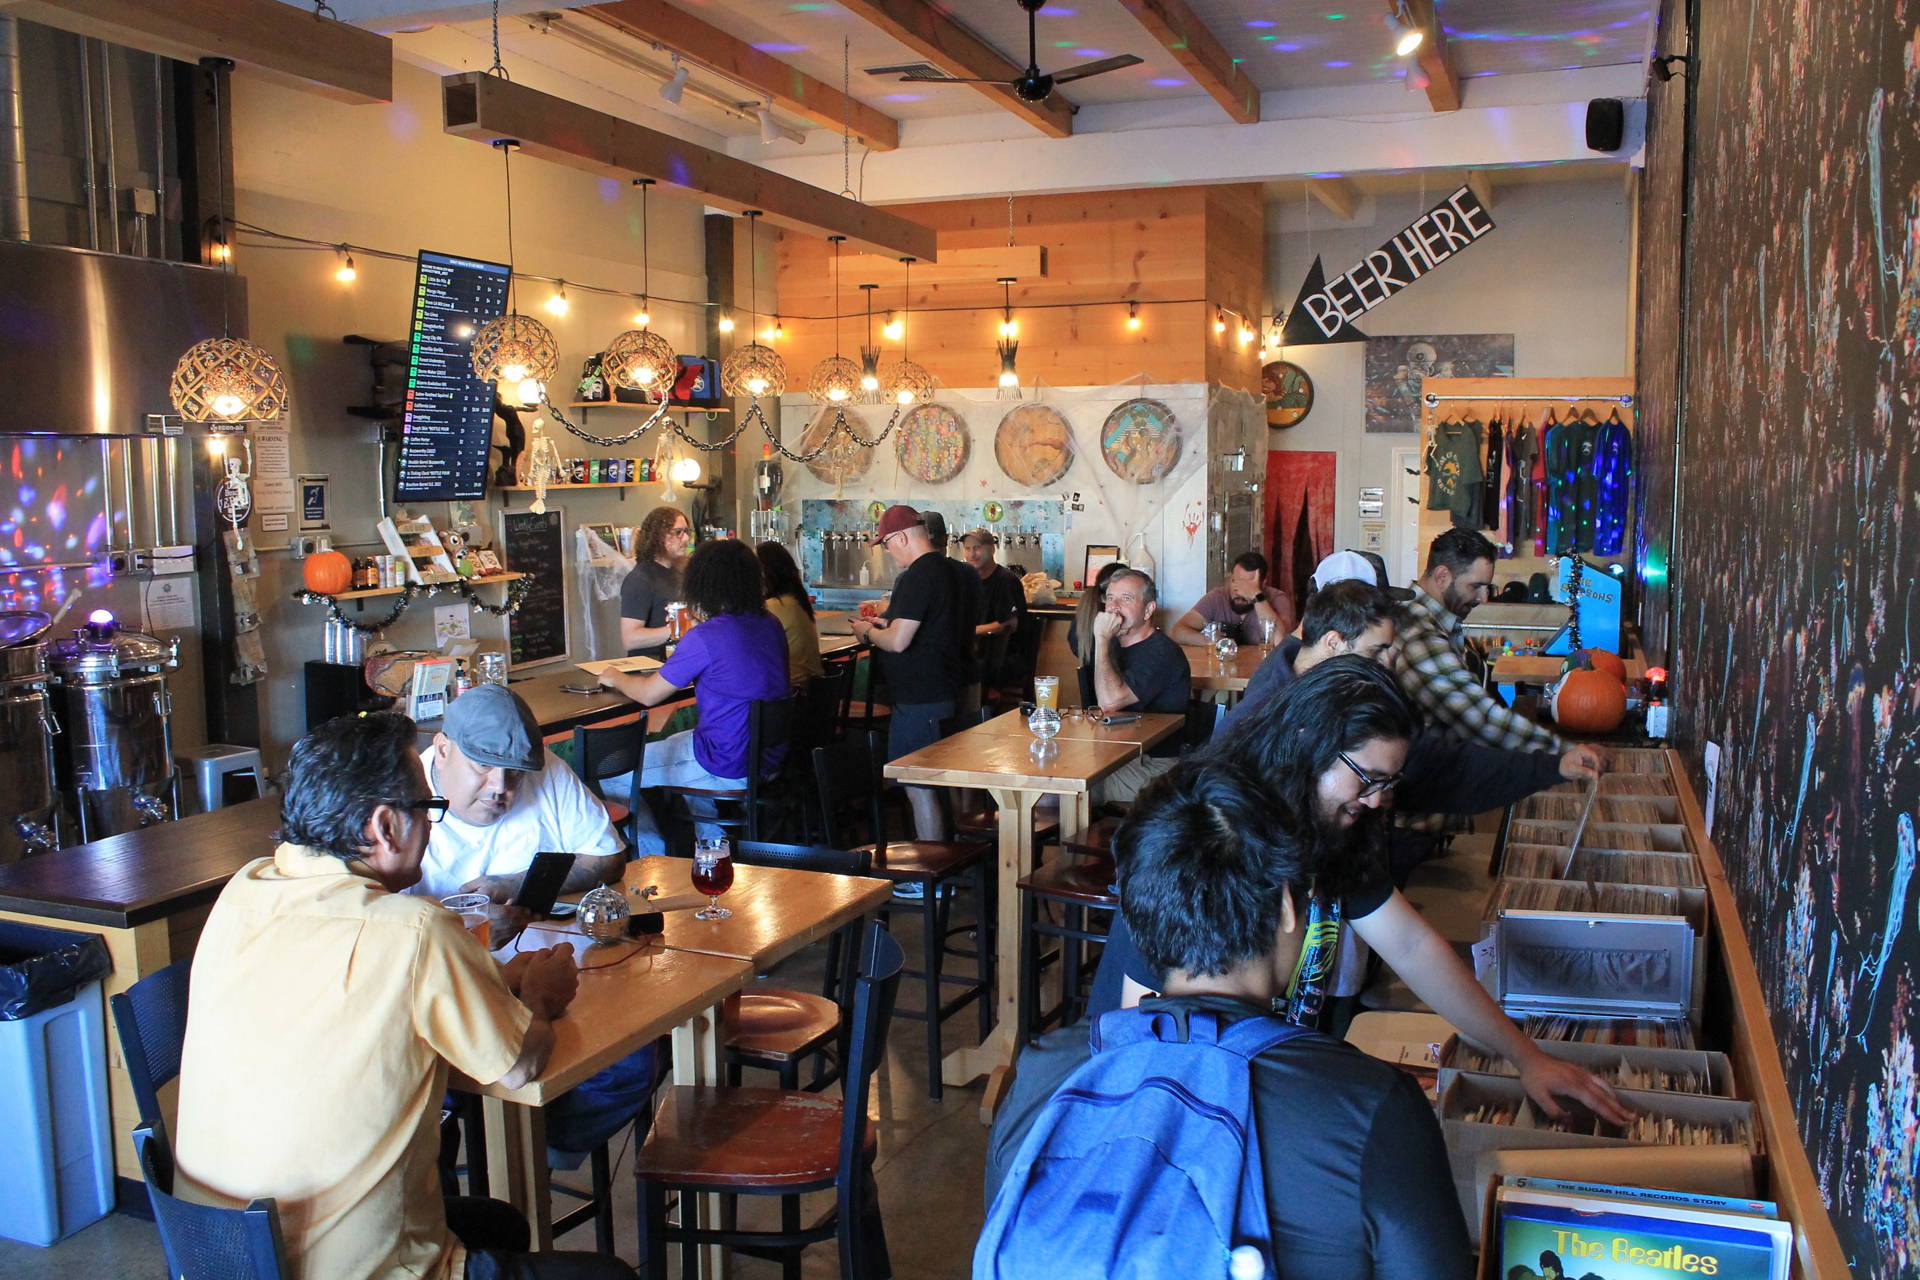 a wide angle view of Smog City West, showing hightop tables, a mural on the wall, low barrels and stools, and the bartop.